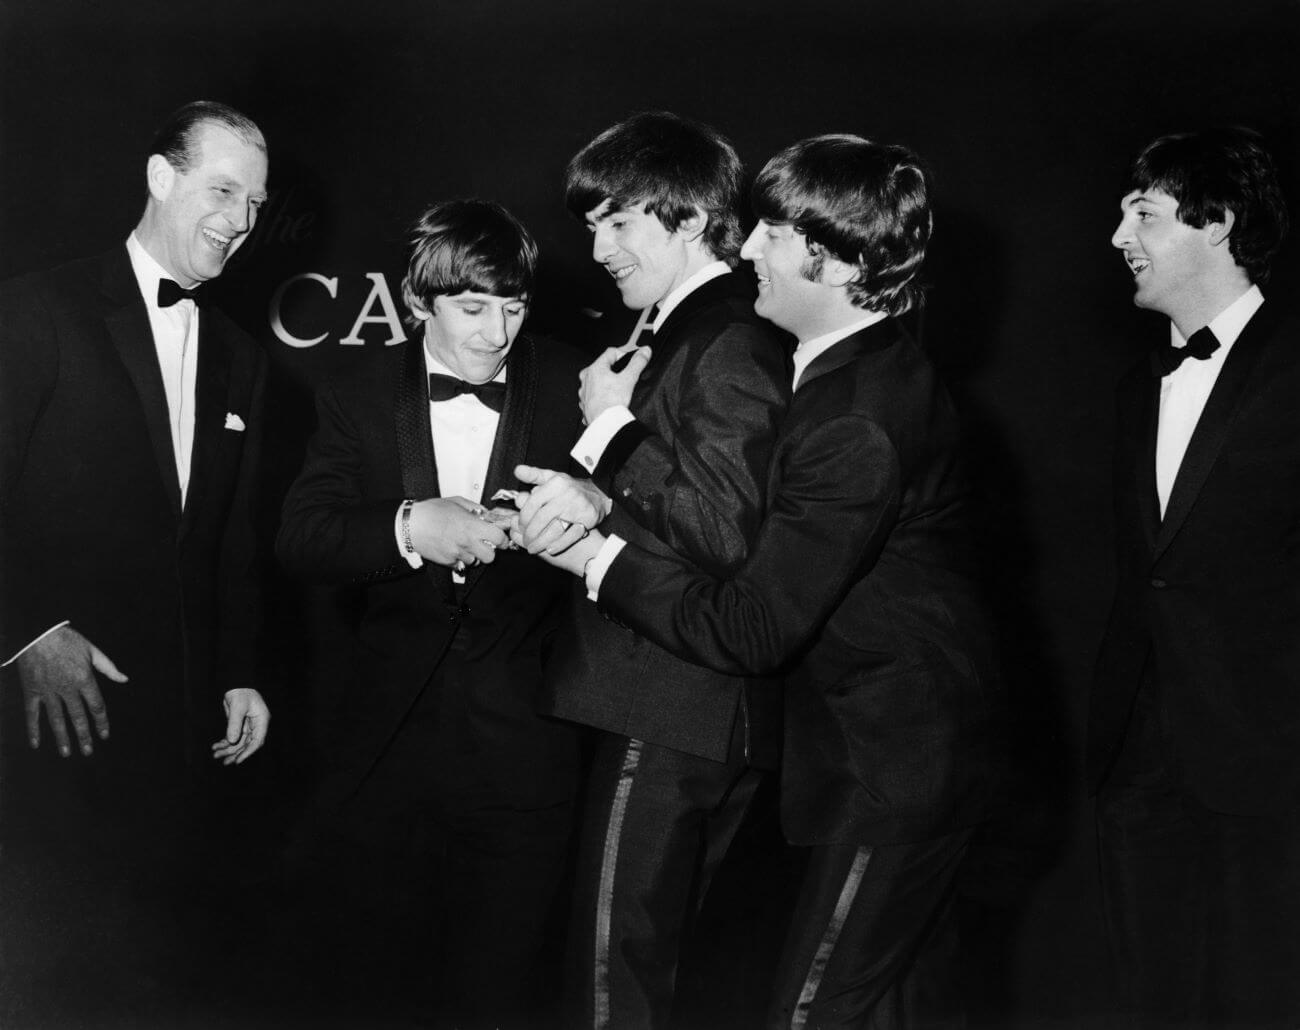 A black and white picture of Prince Philip, Ringo Starr, George Harrison, John Lennon, and Paul McCartney wearing tuxedos.